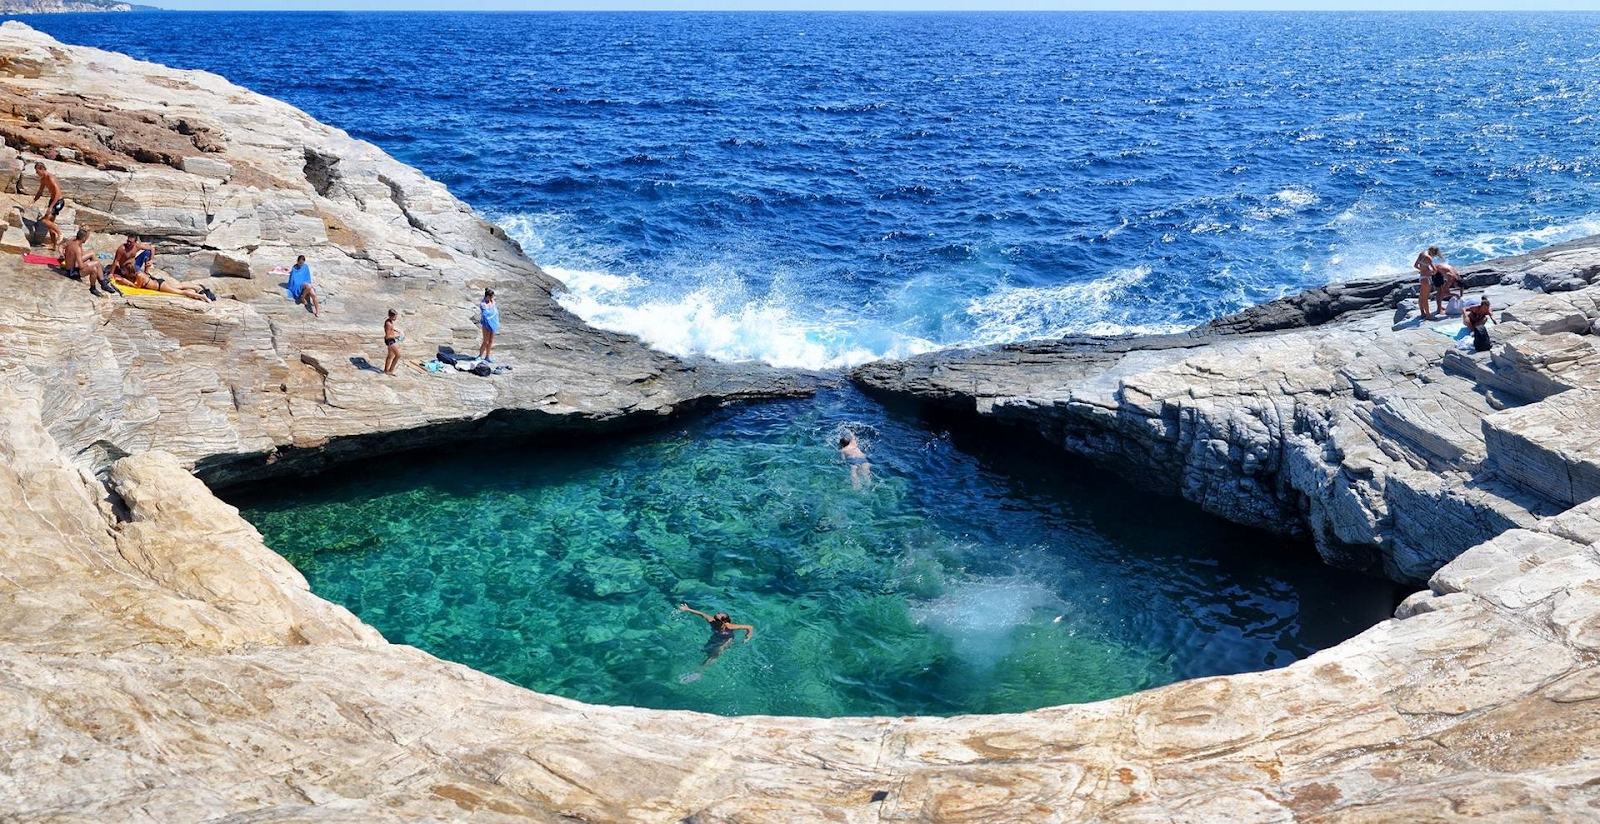 Giola Lagoon, a natural pool near the village of Astris on Thassos in the Greek Islands.